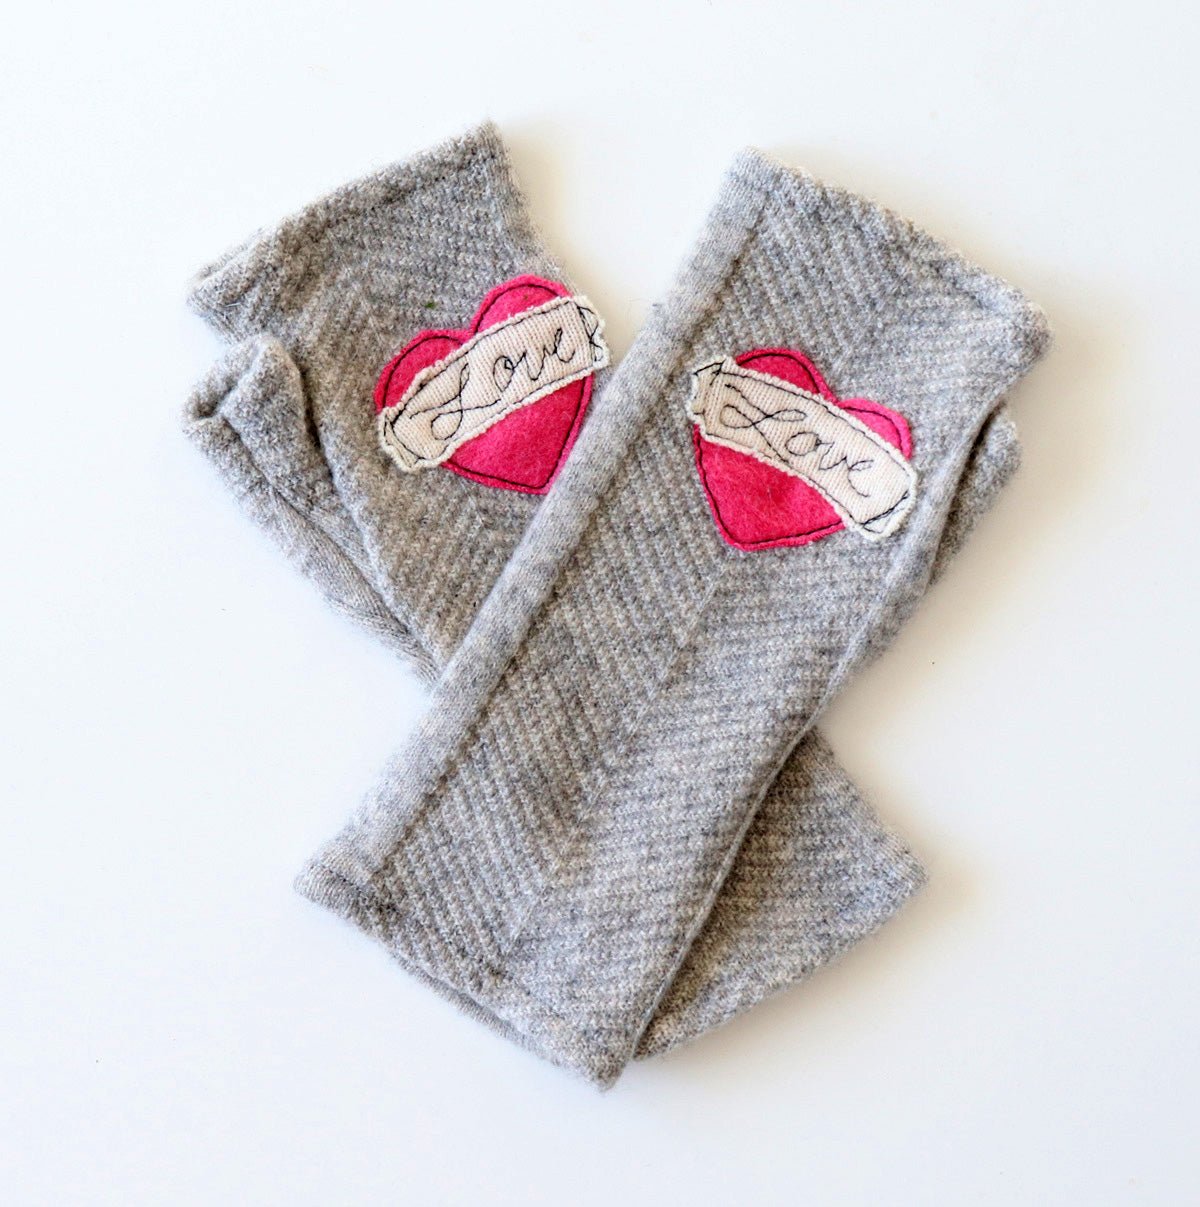 Pink Love on Grey Cashmere Fingerless Gloves - BESPOKE PROVISIONS INC